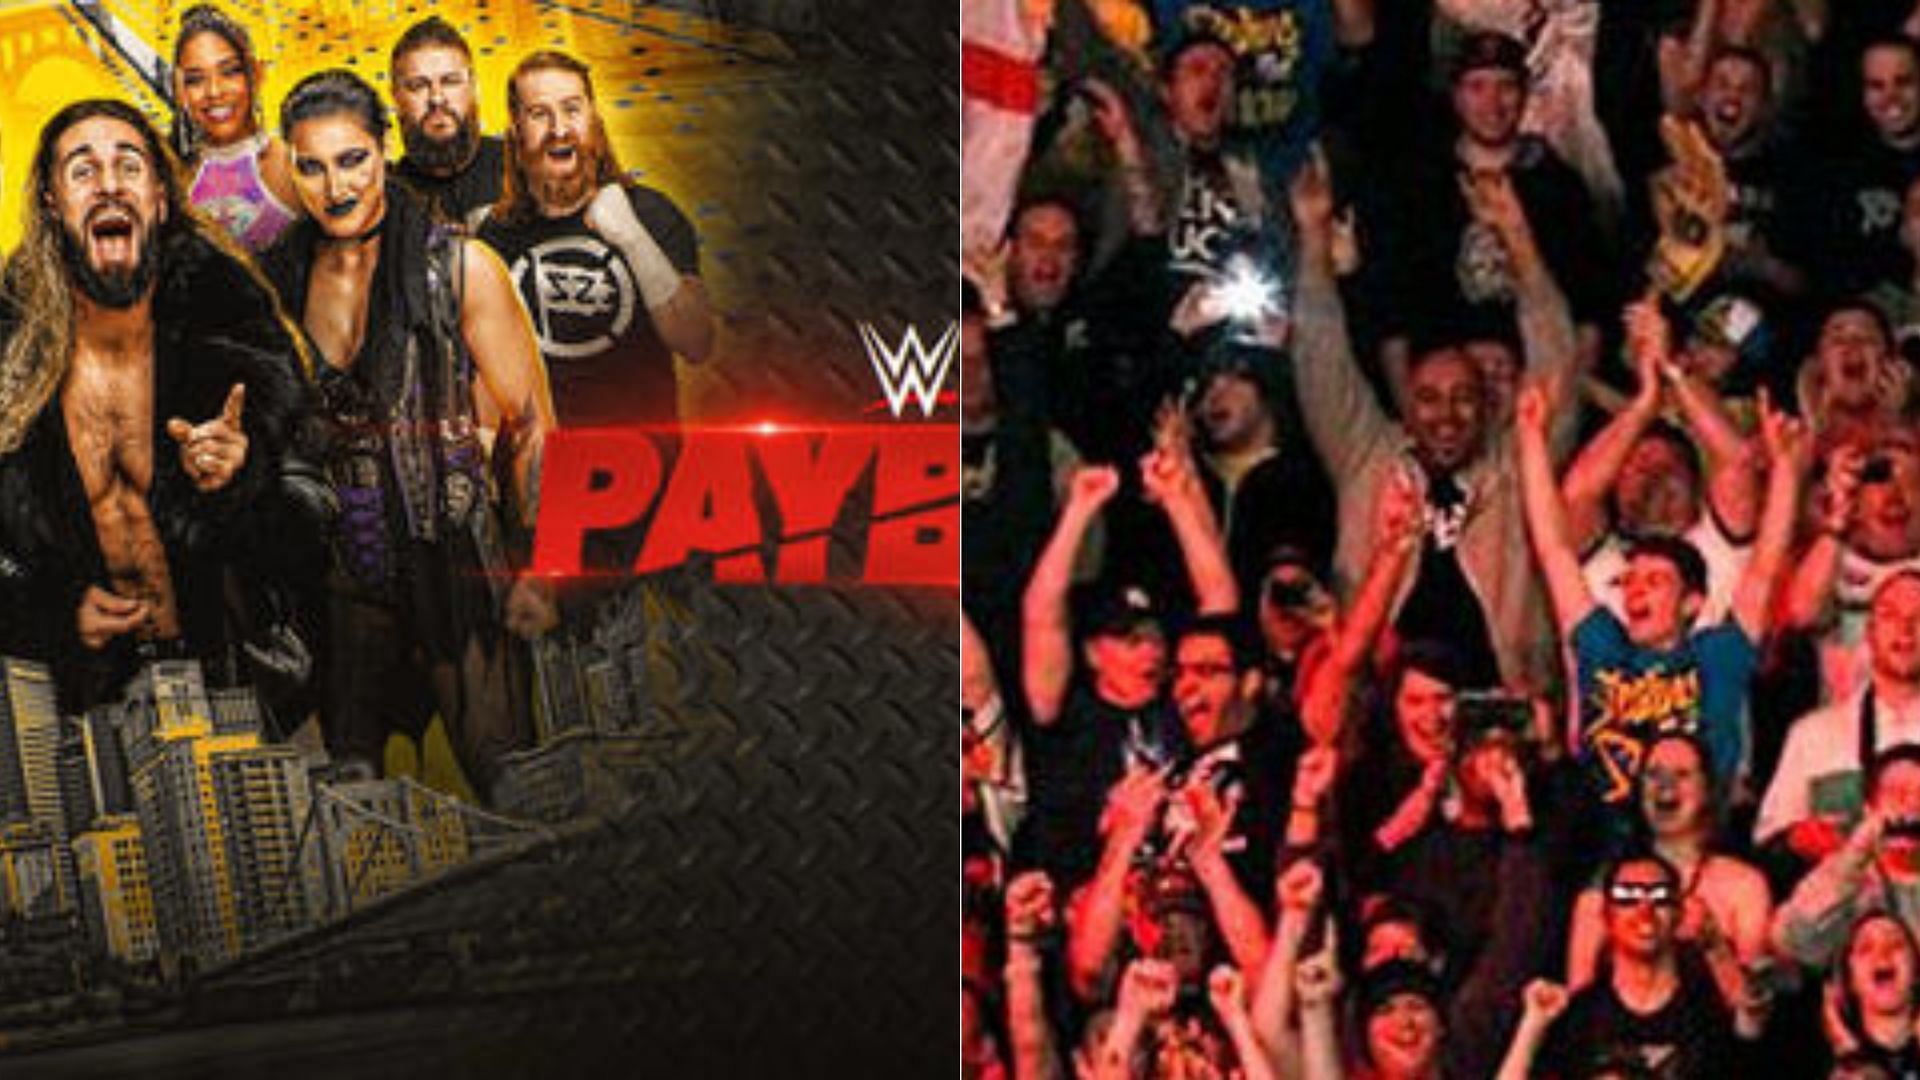 WWE Payback was the company